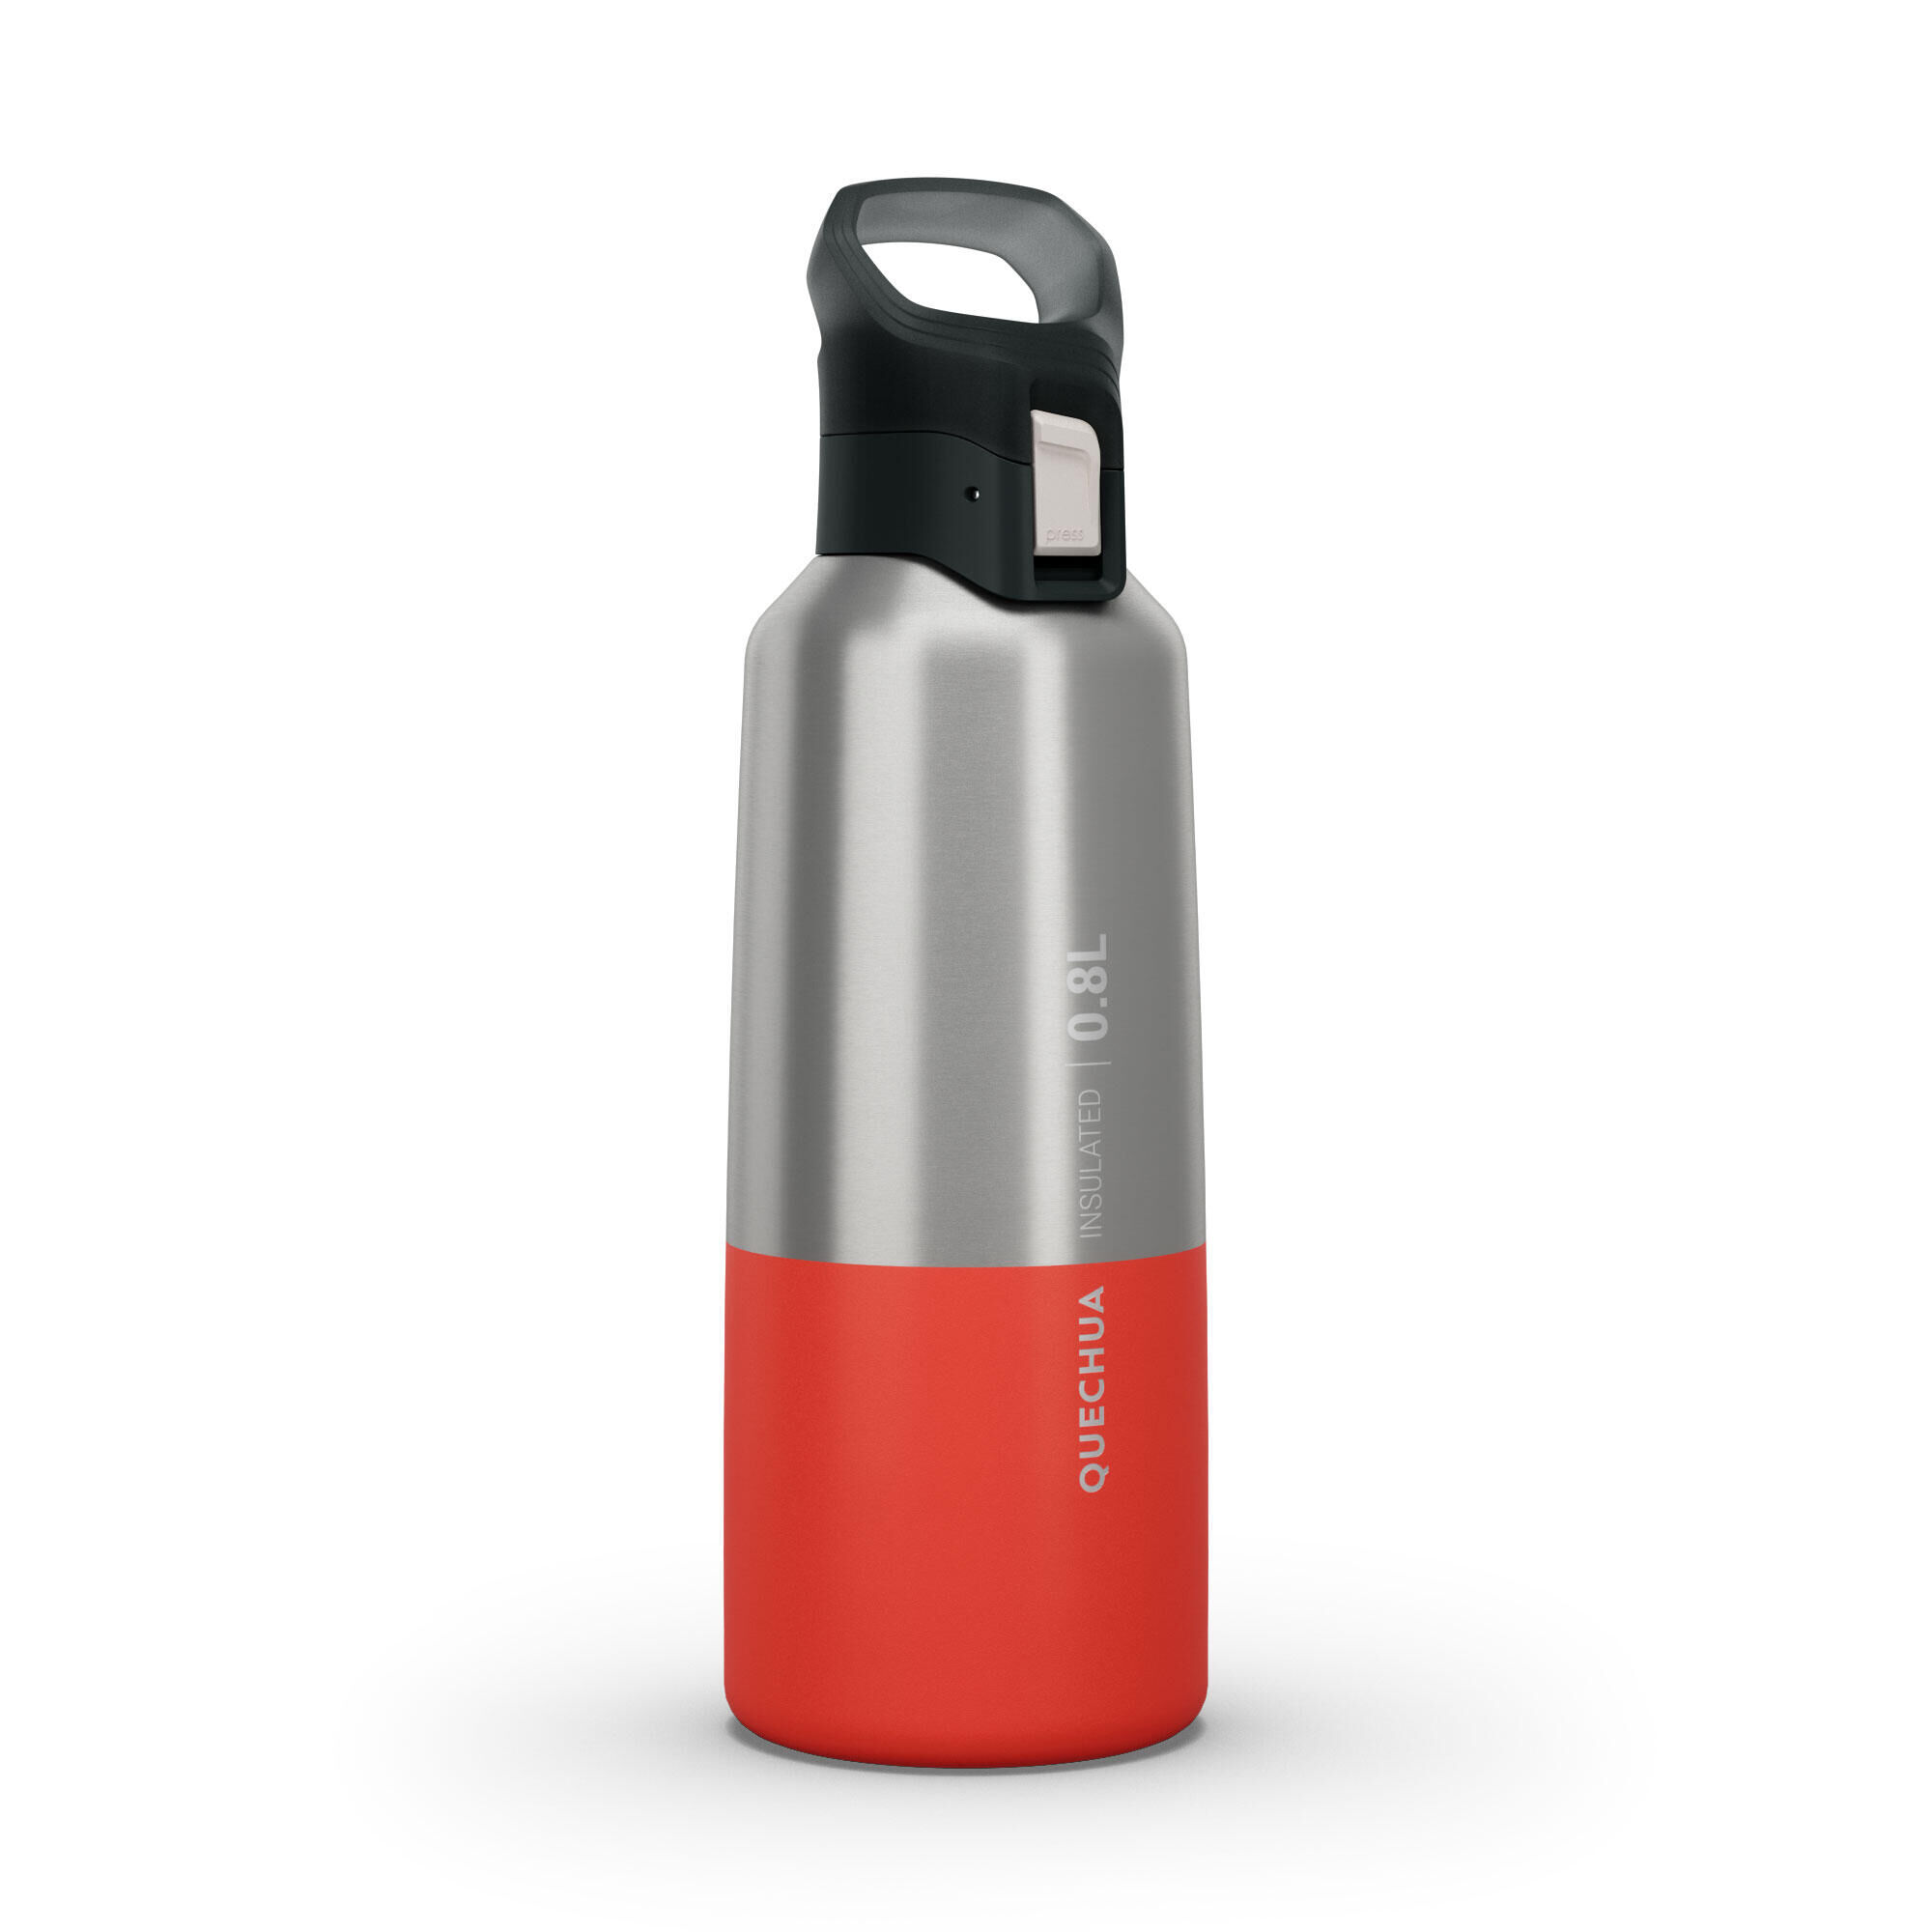 QUECHUA 0.8 L stainless steel water bottle with quick-open cap for hiking - Red